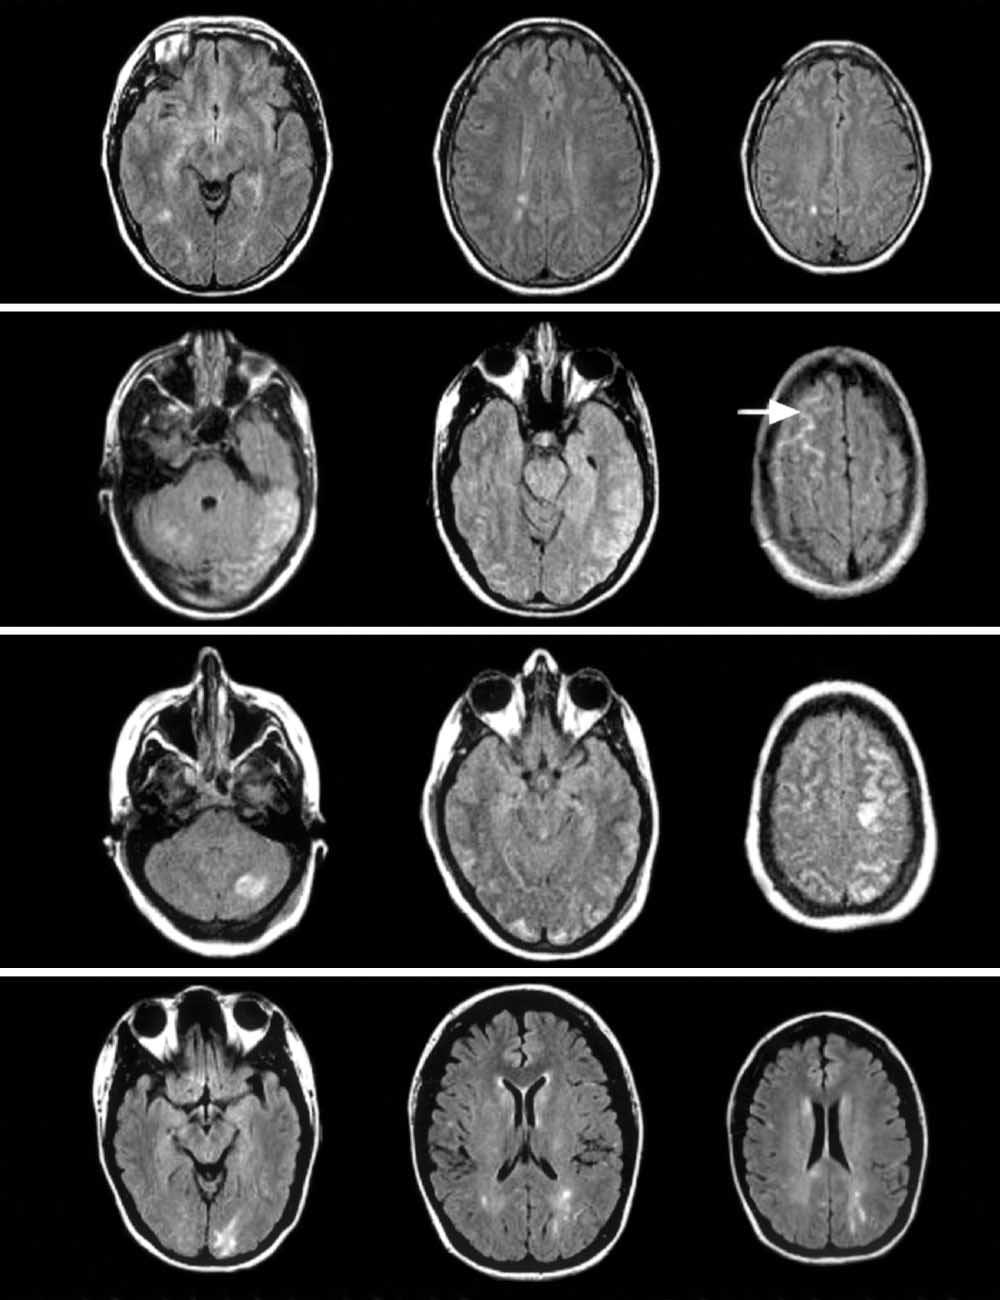 A B C D Figure 1. Brain magnetic resonance imaging (MRI) fluid-attenuated inversion recovery sequences. A, Patient 1.